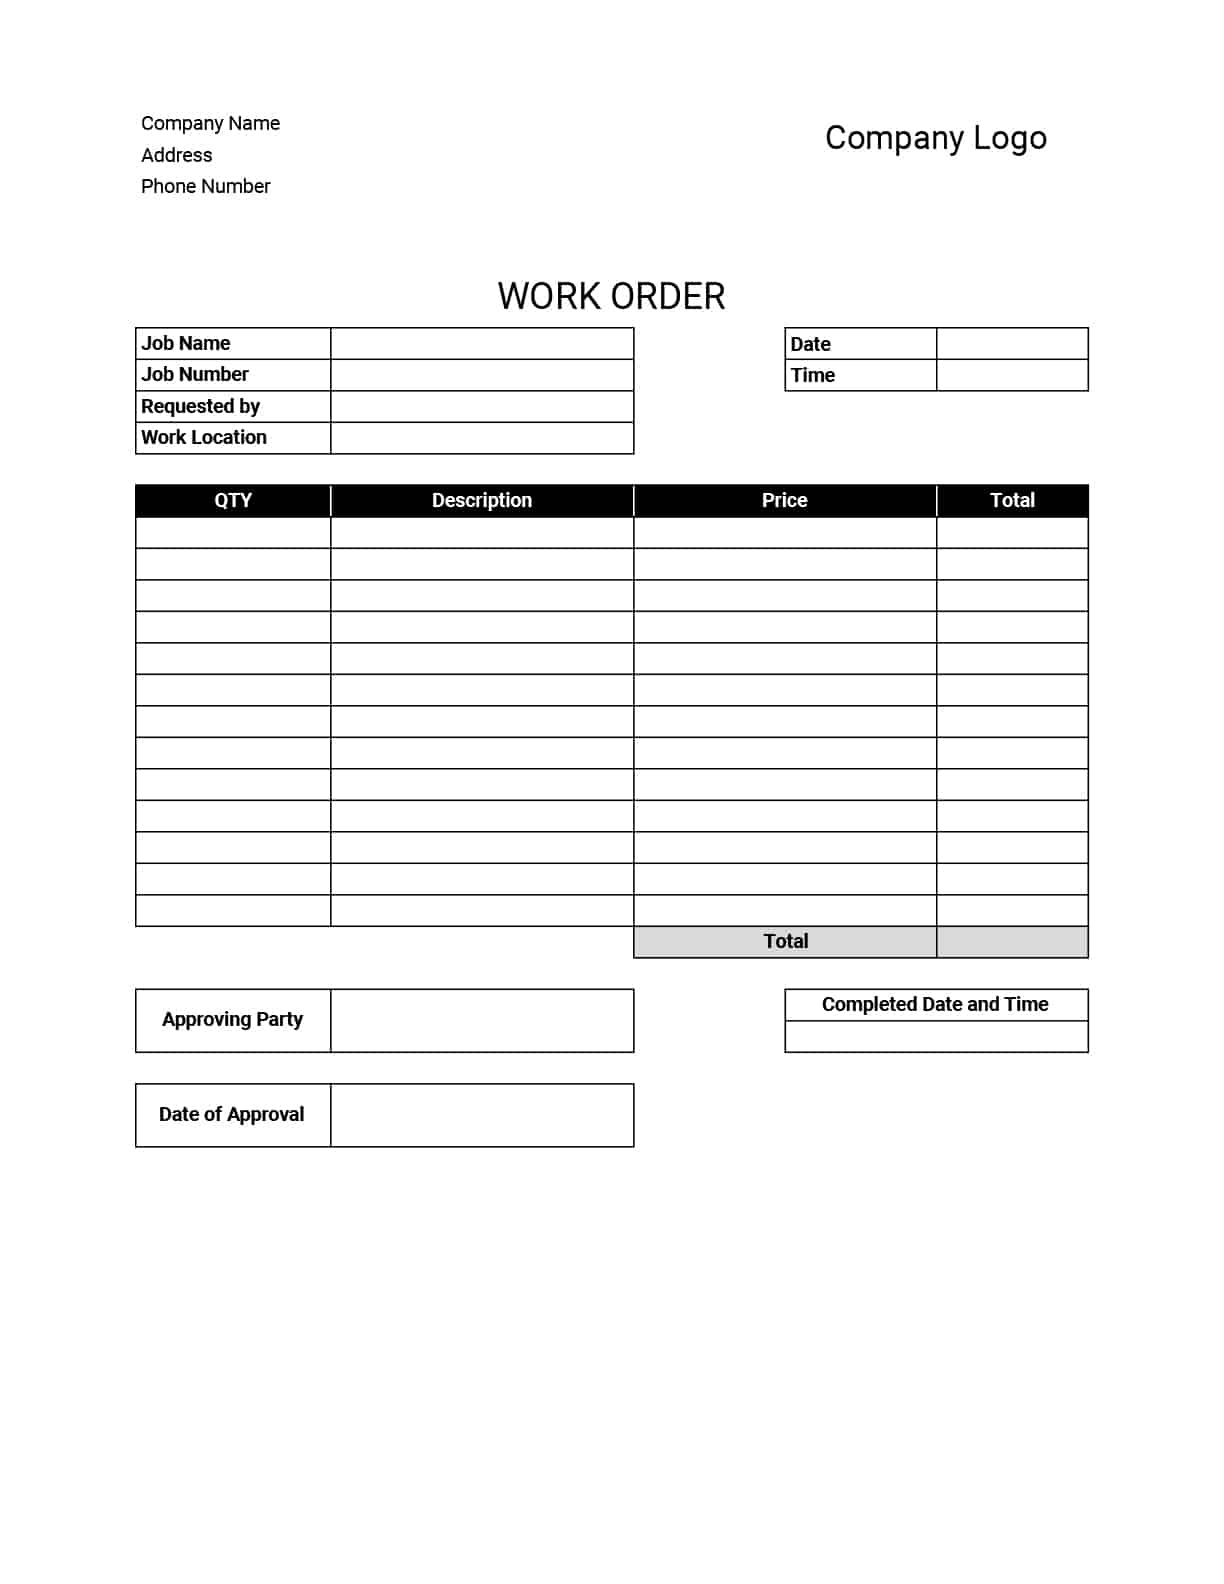 Work Order Templates: Download Print for Free